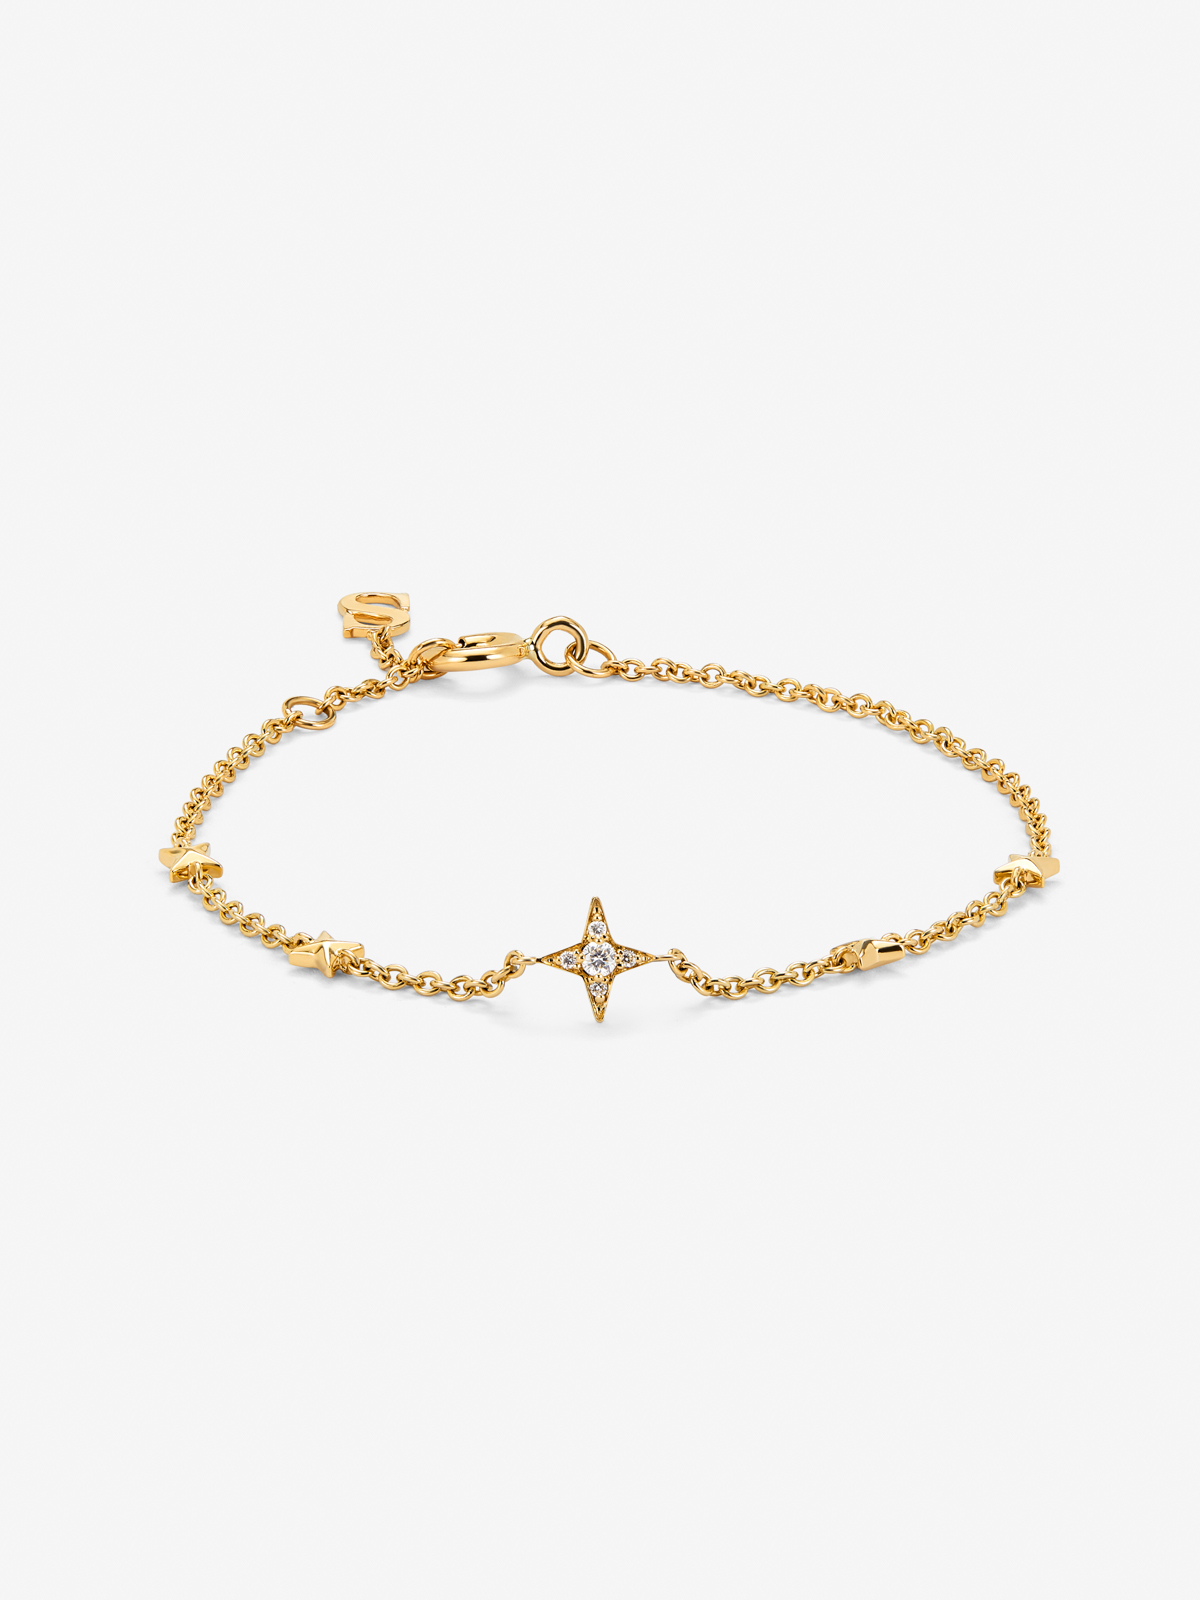 18K yellow gold bracelet with 5 brilliant-cut diamonds with a total of 0.04 cts